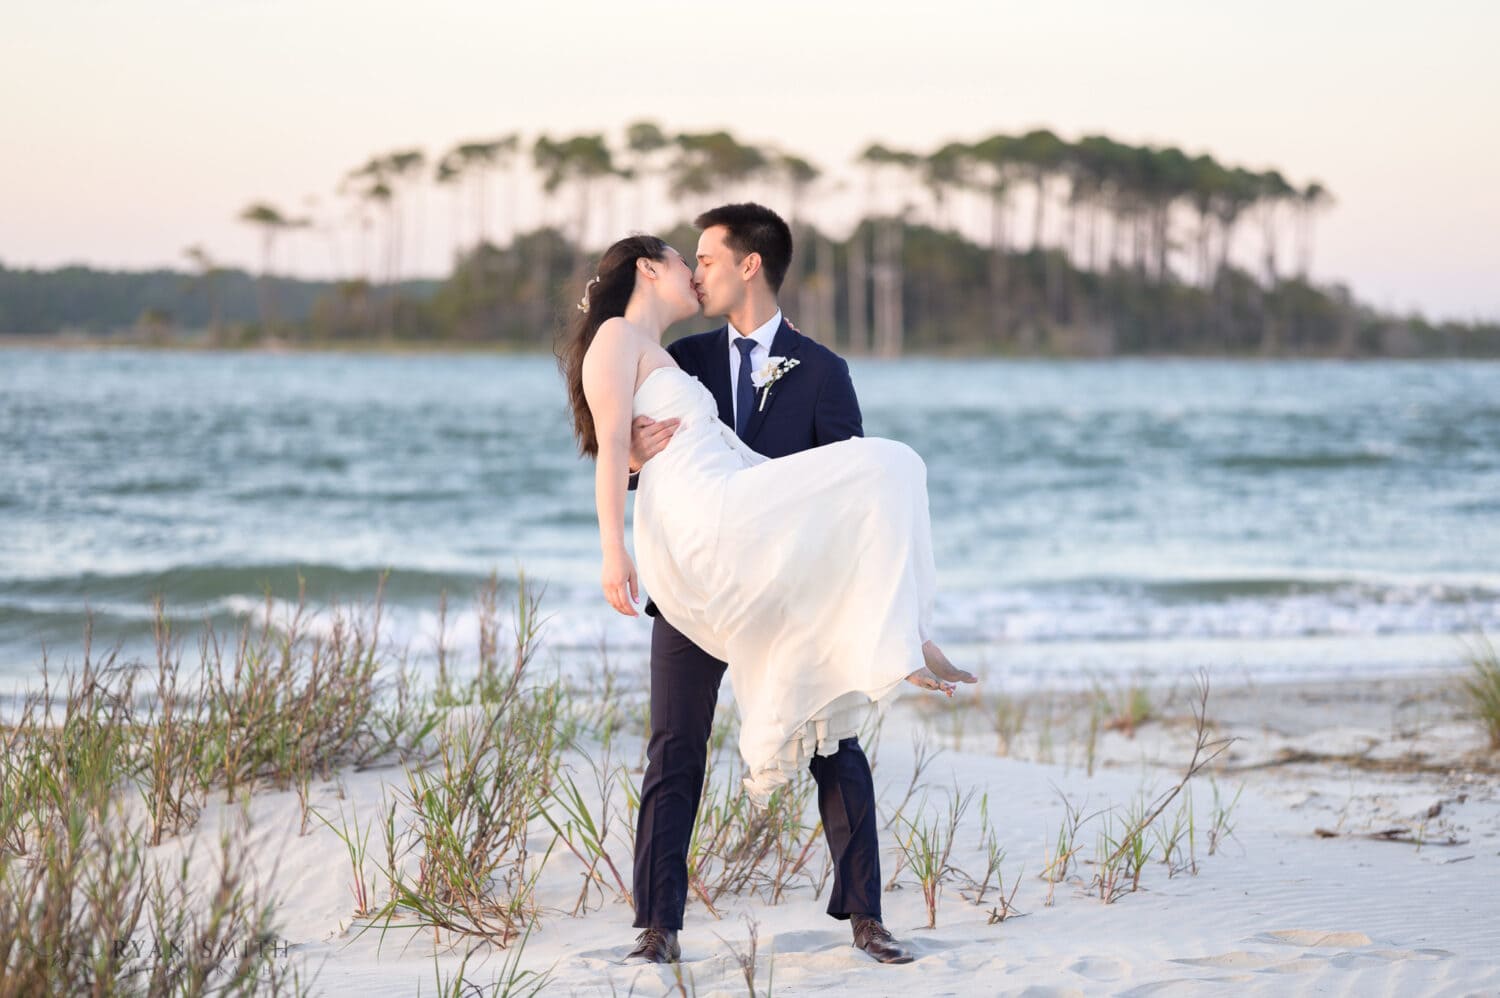 Groom holding the bride for a kiss - Cherry Grove Point - North Myrtle Beach